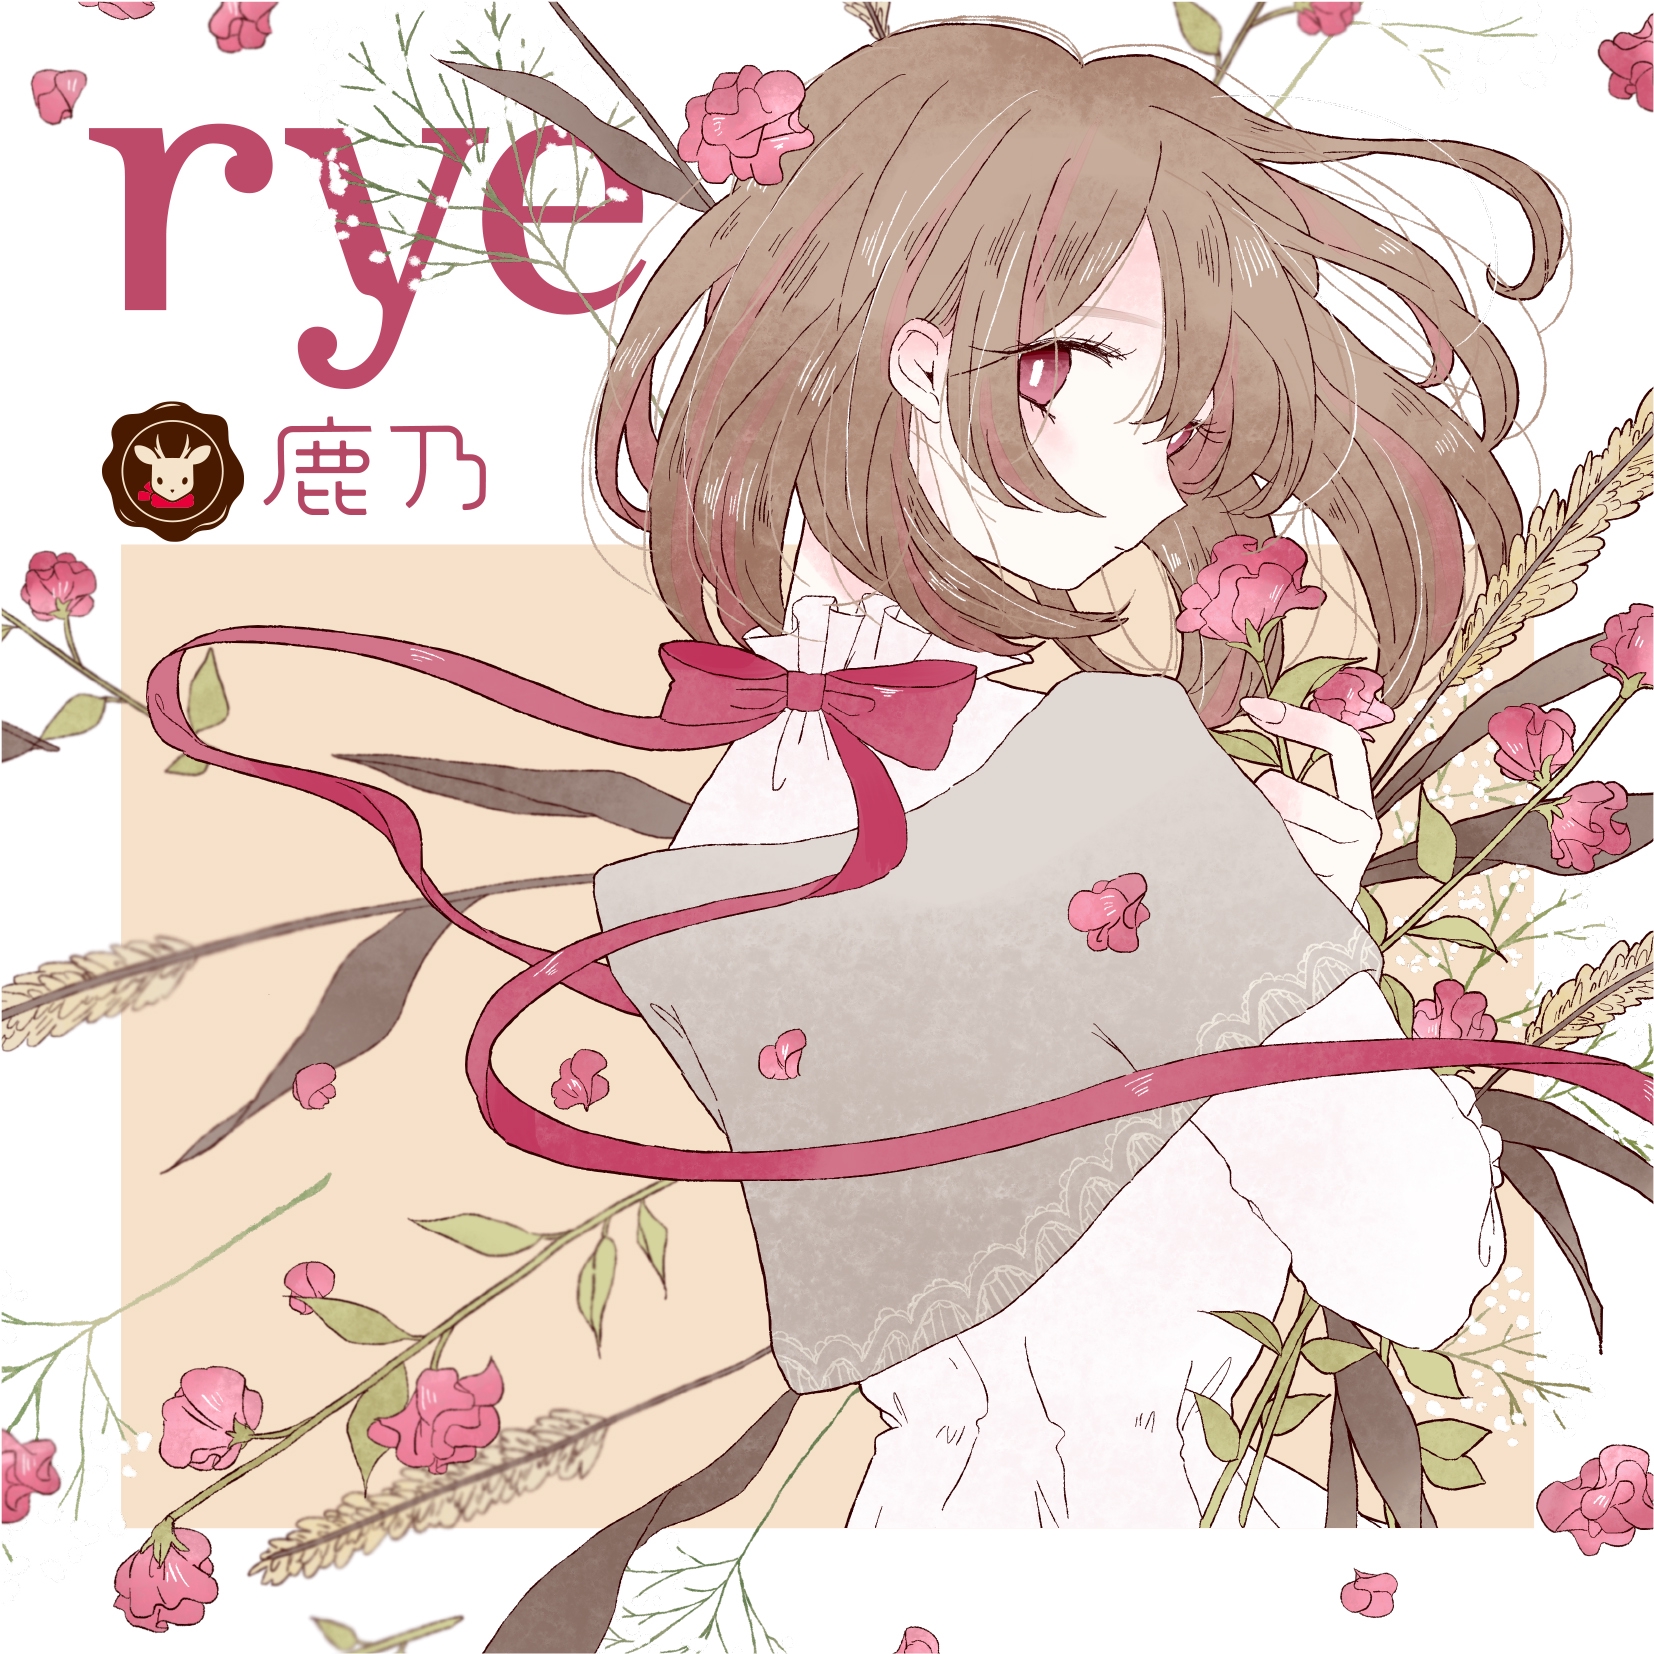 rye | 鹿乃 official site